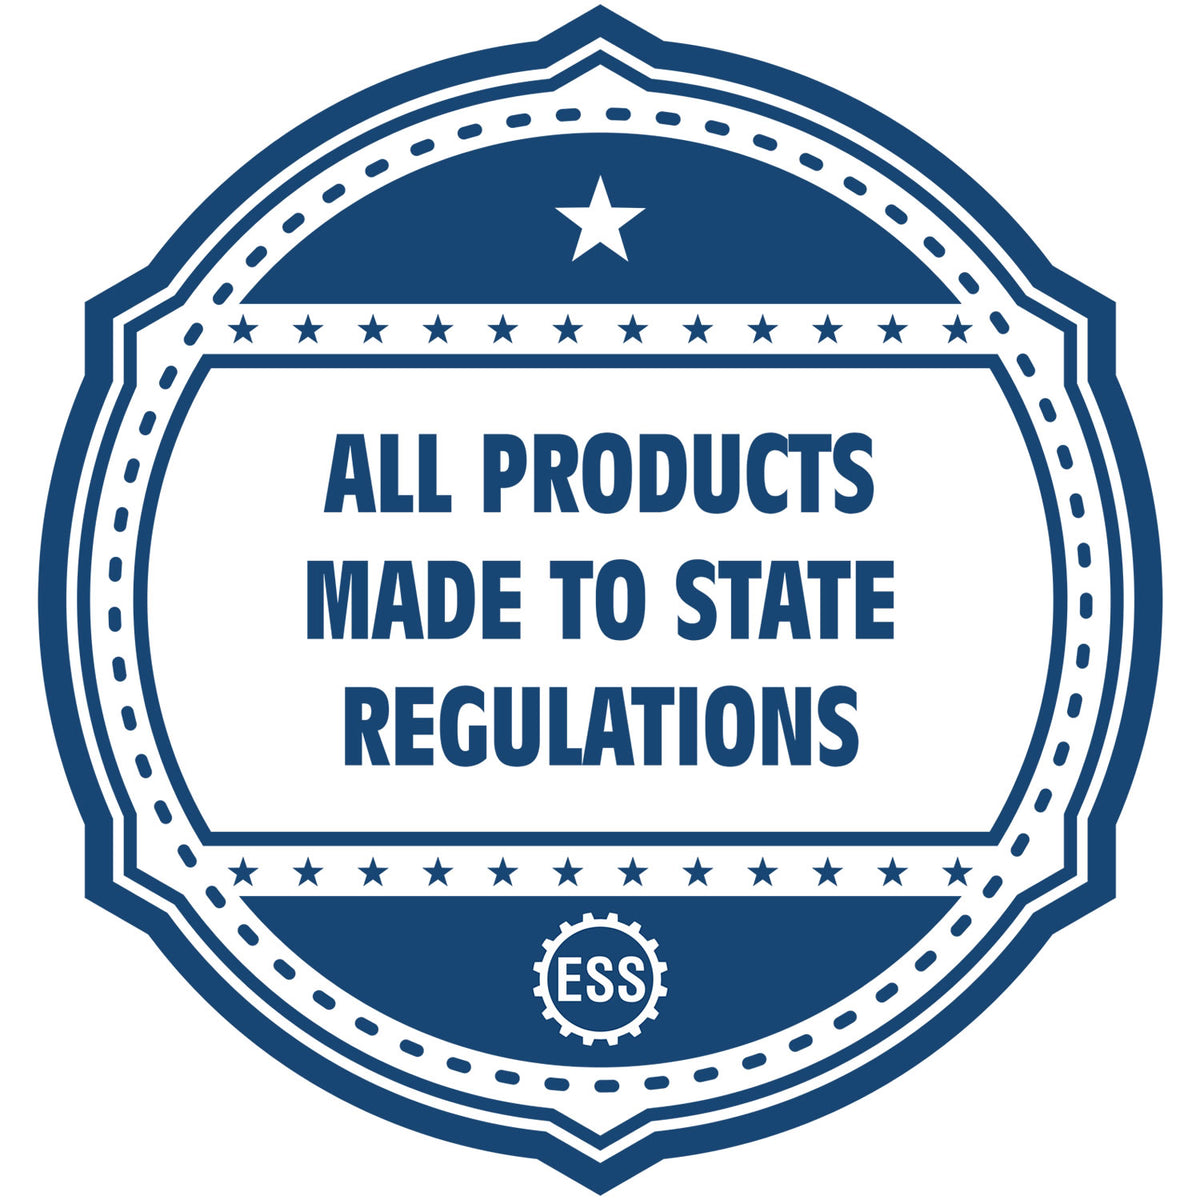 A blue icon or badge for the Gift New Jersey Engineer Seal showing that this product is made in compliance with state regulations.